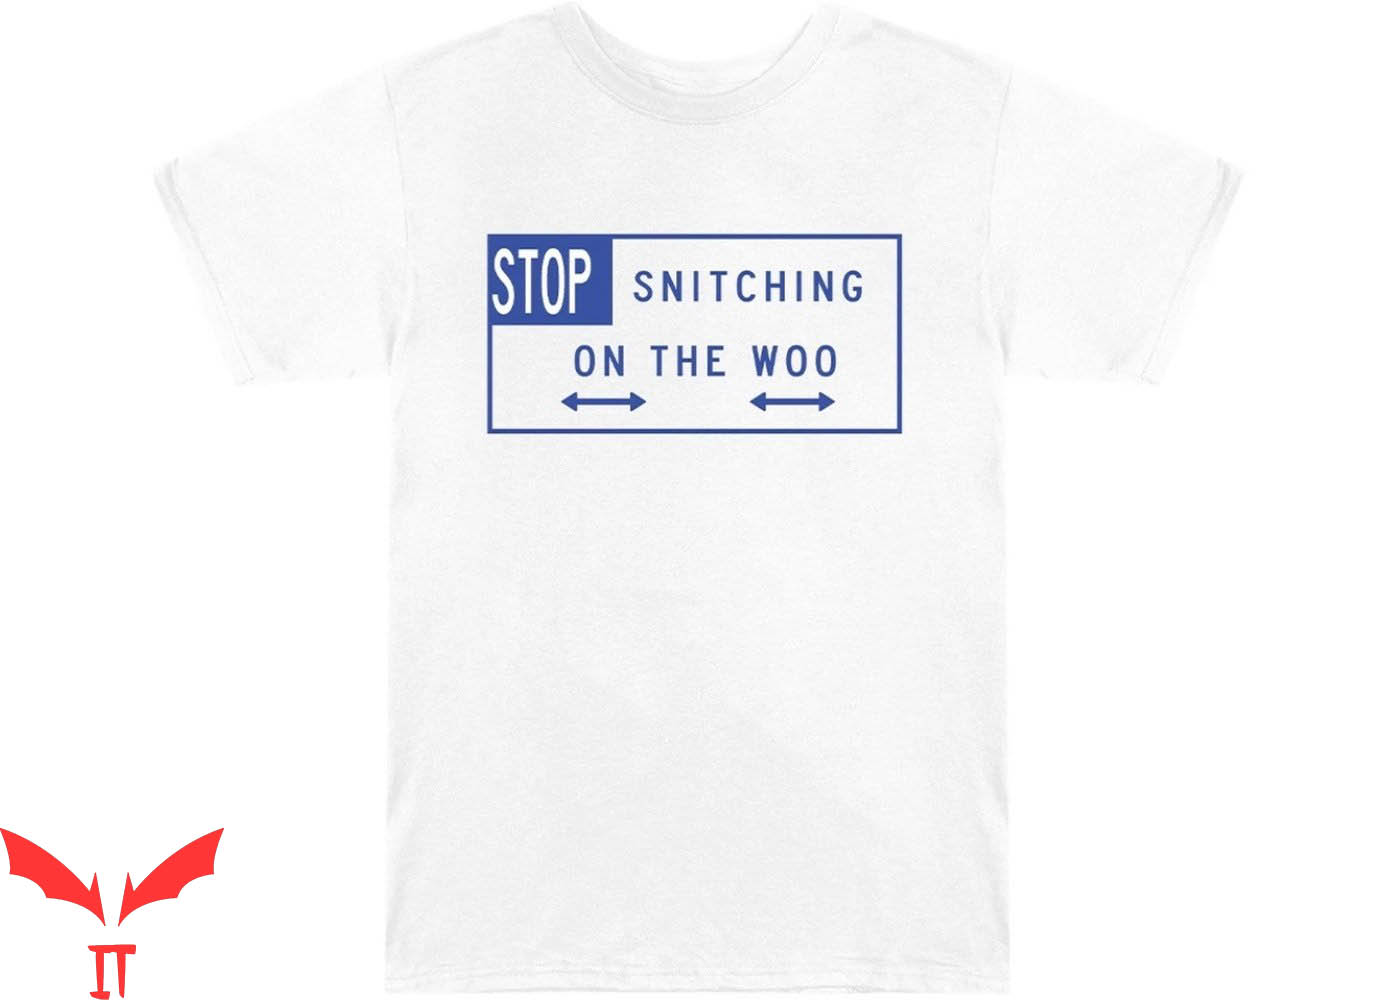 The Woo Vlone T-Shirt Stop Snitching On The Woo Hip Hop